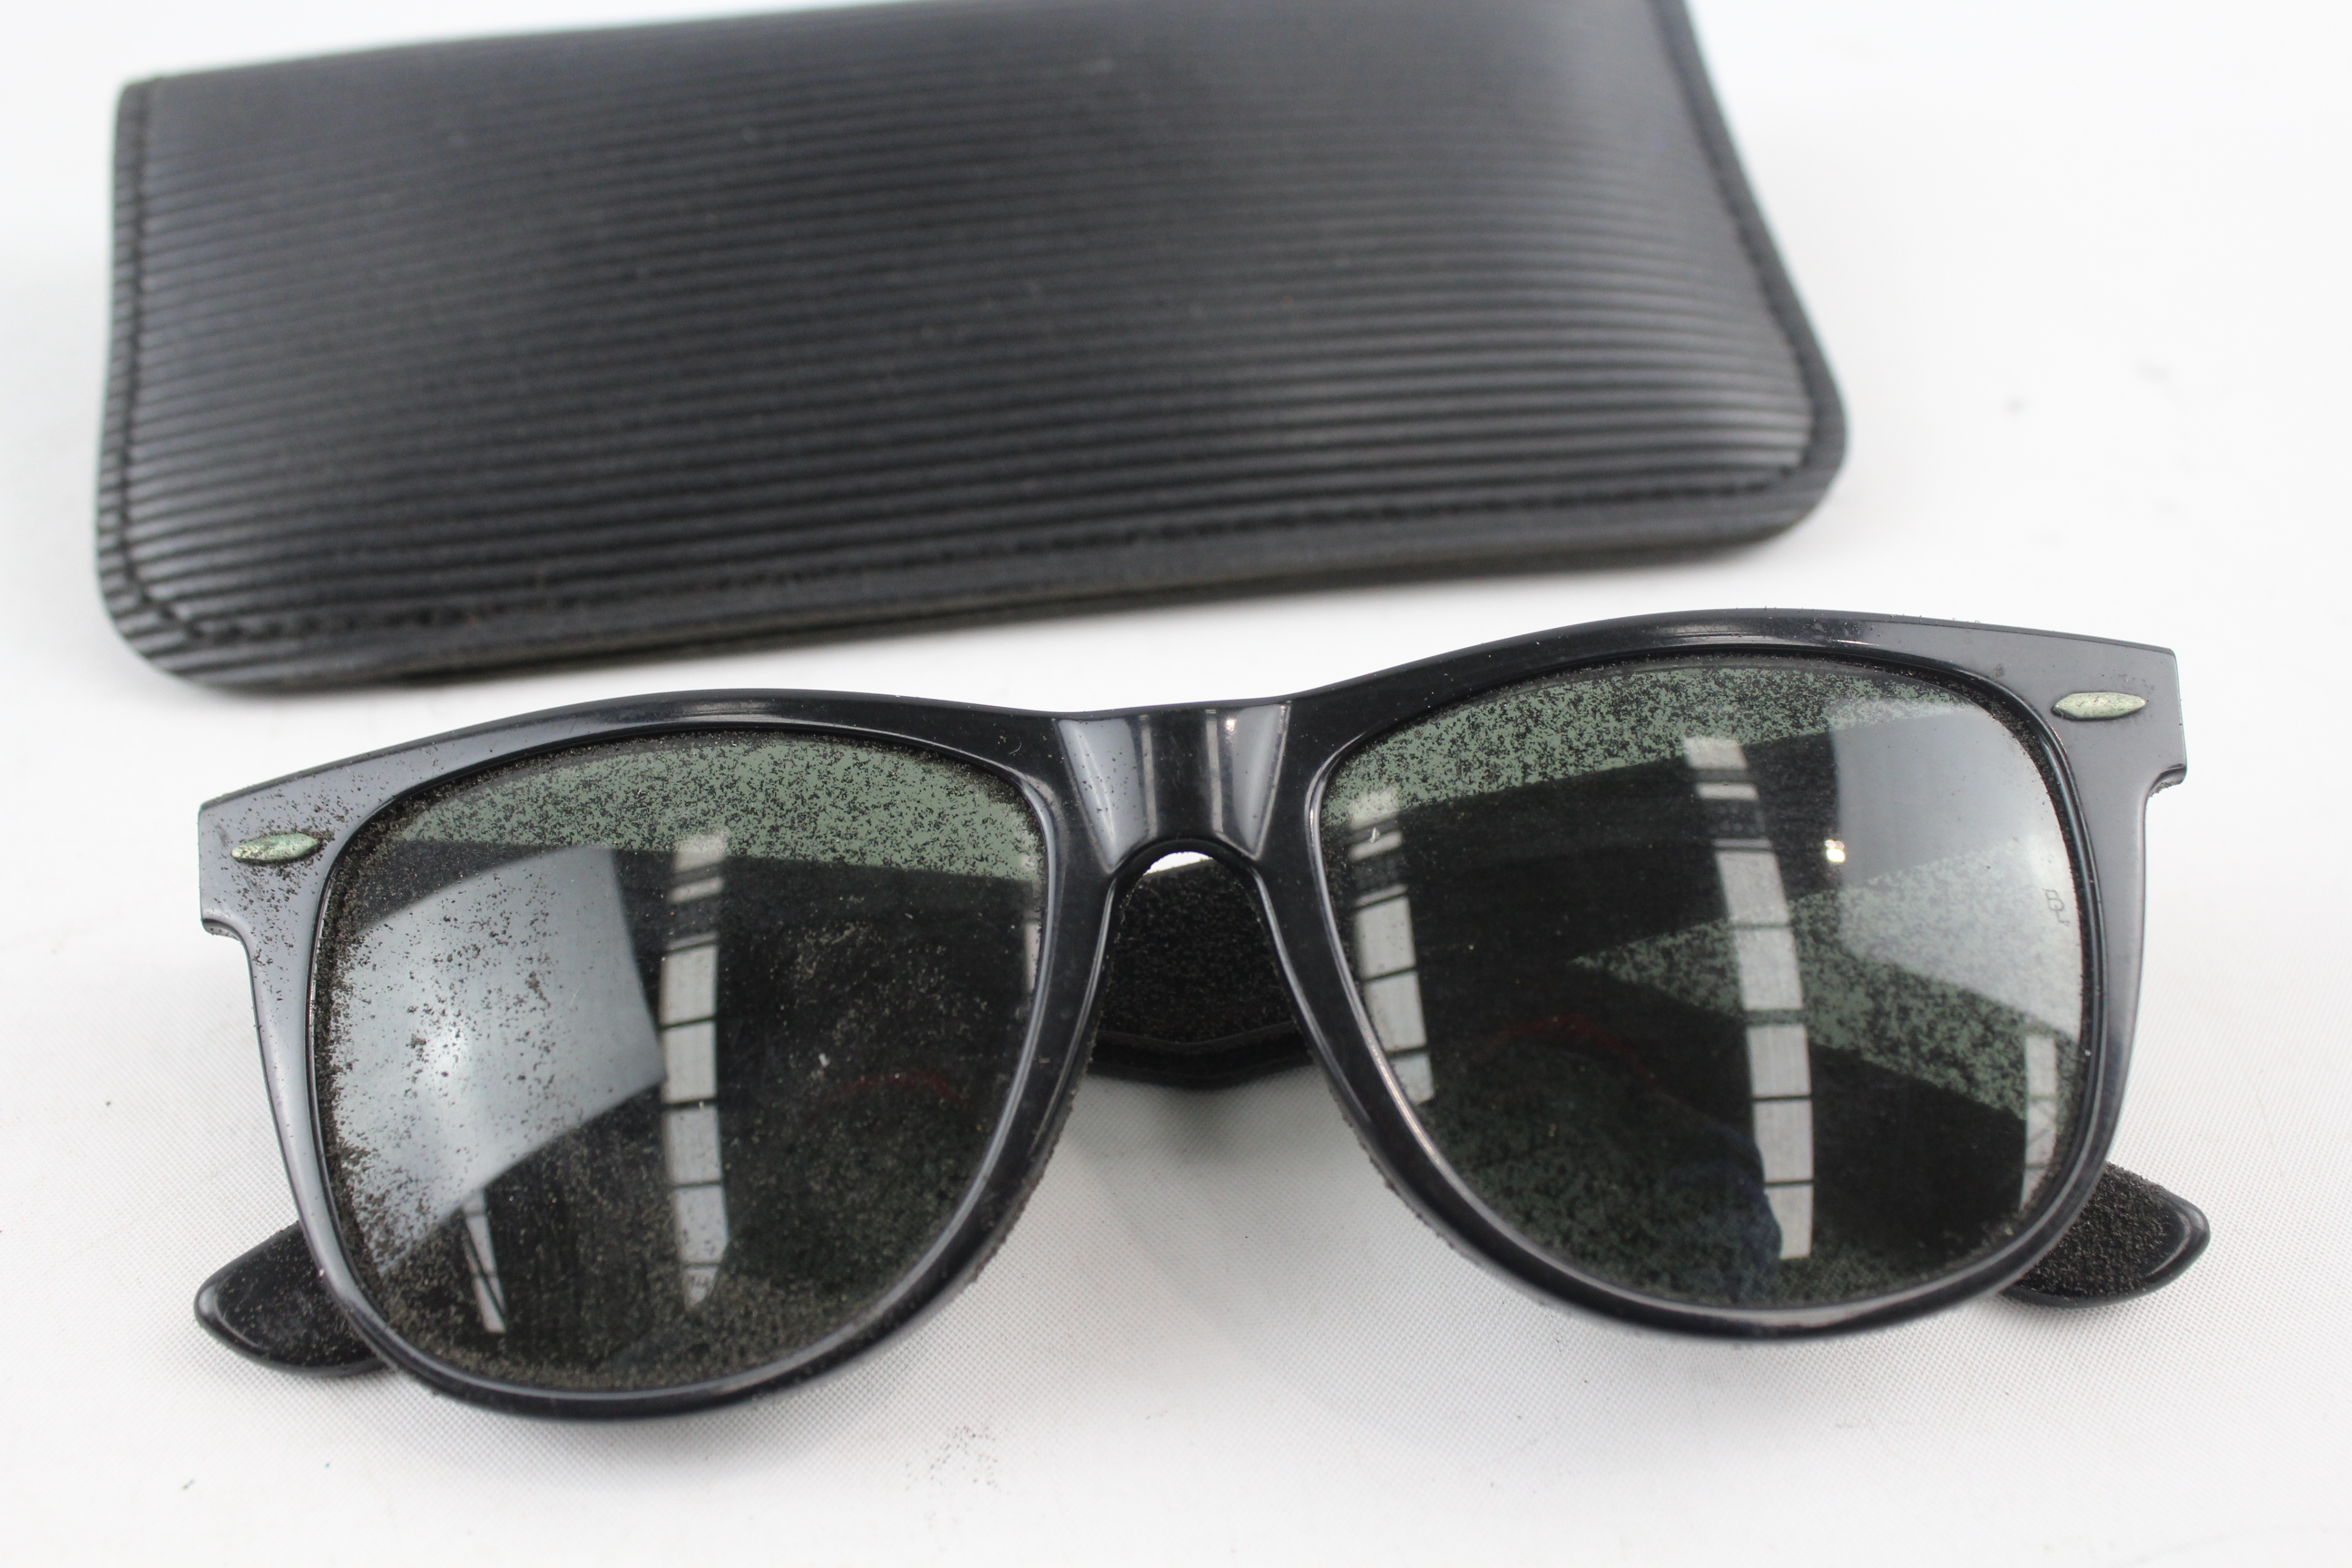 Vintage Bausch & Lomb Ray-Ban Sunglasses 668326 - Image 2 of 3